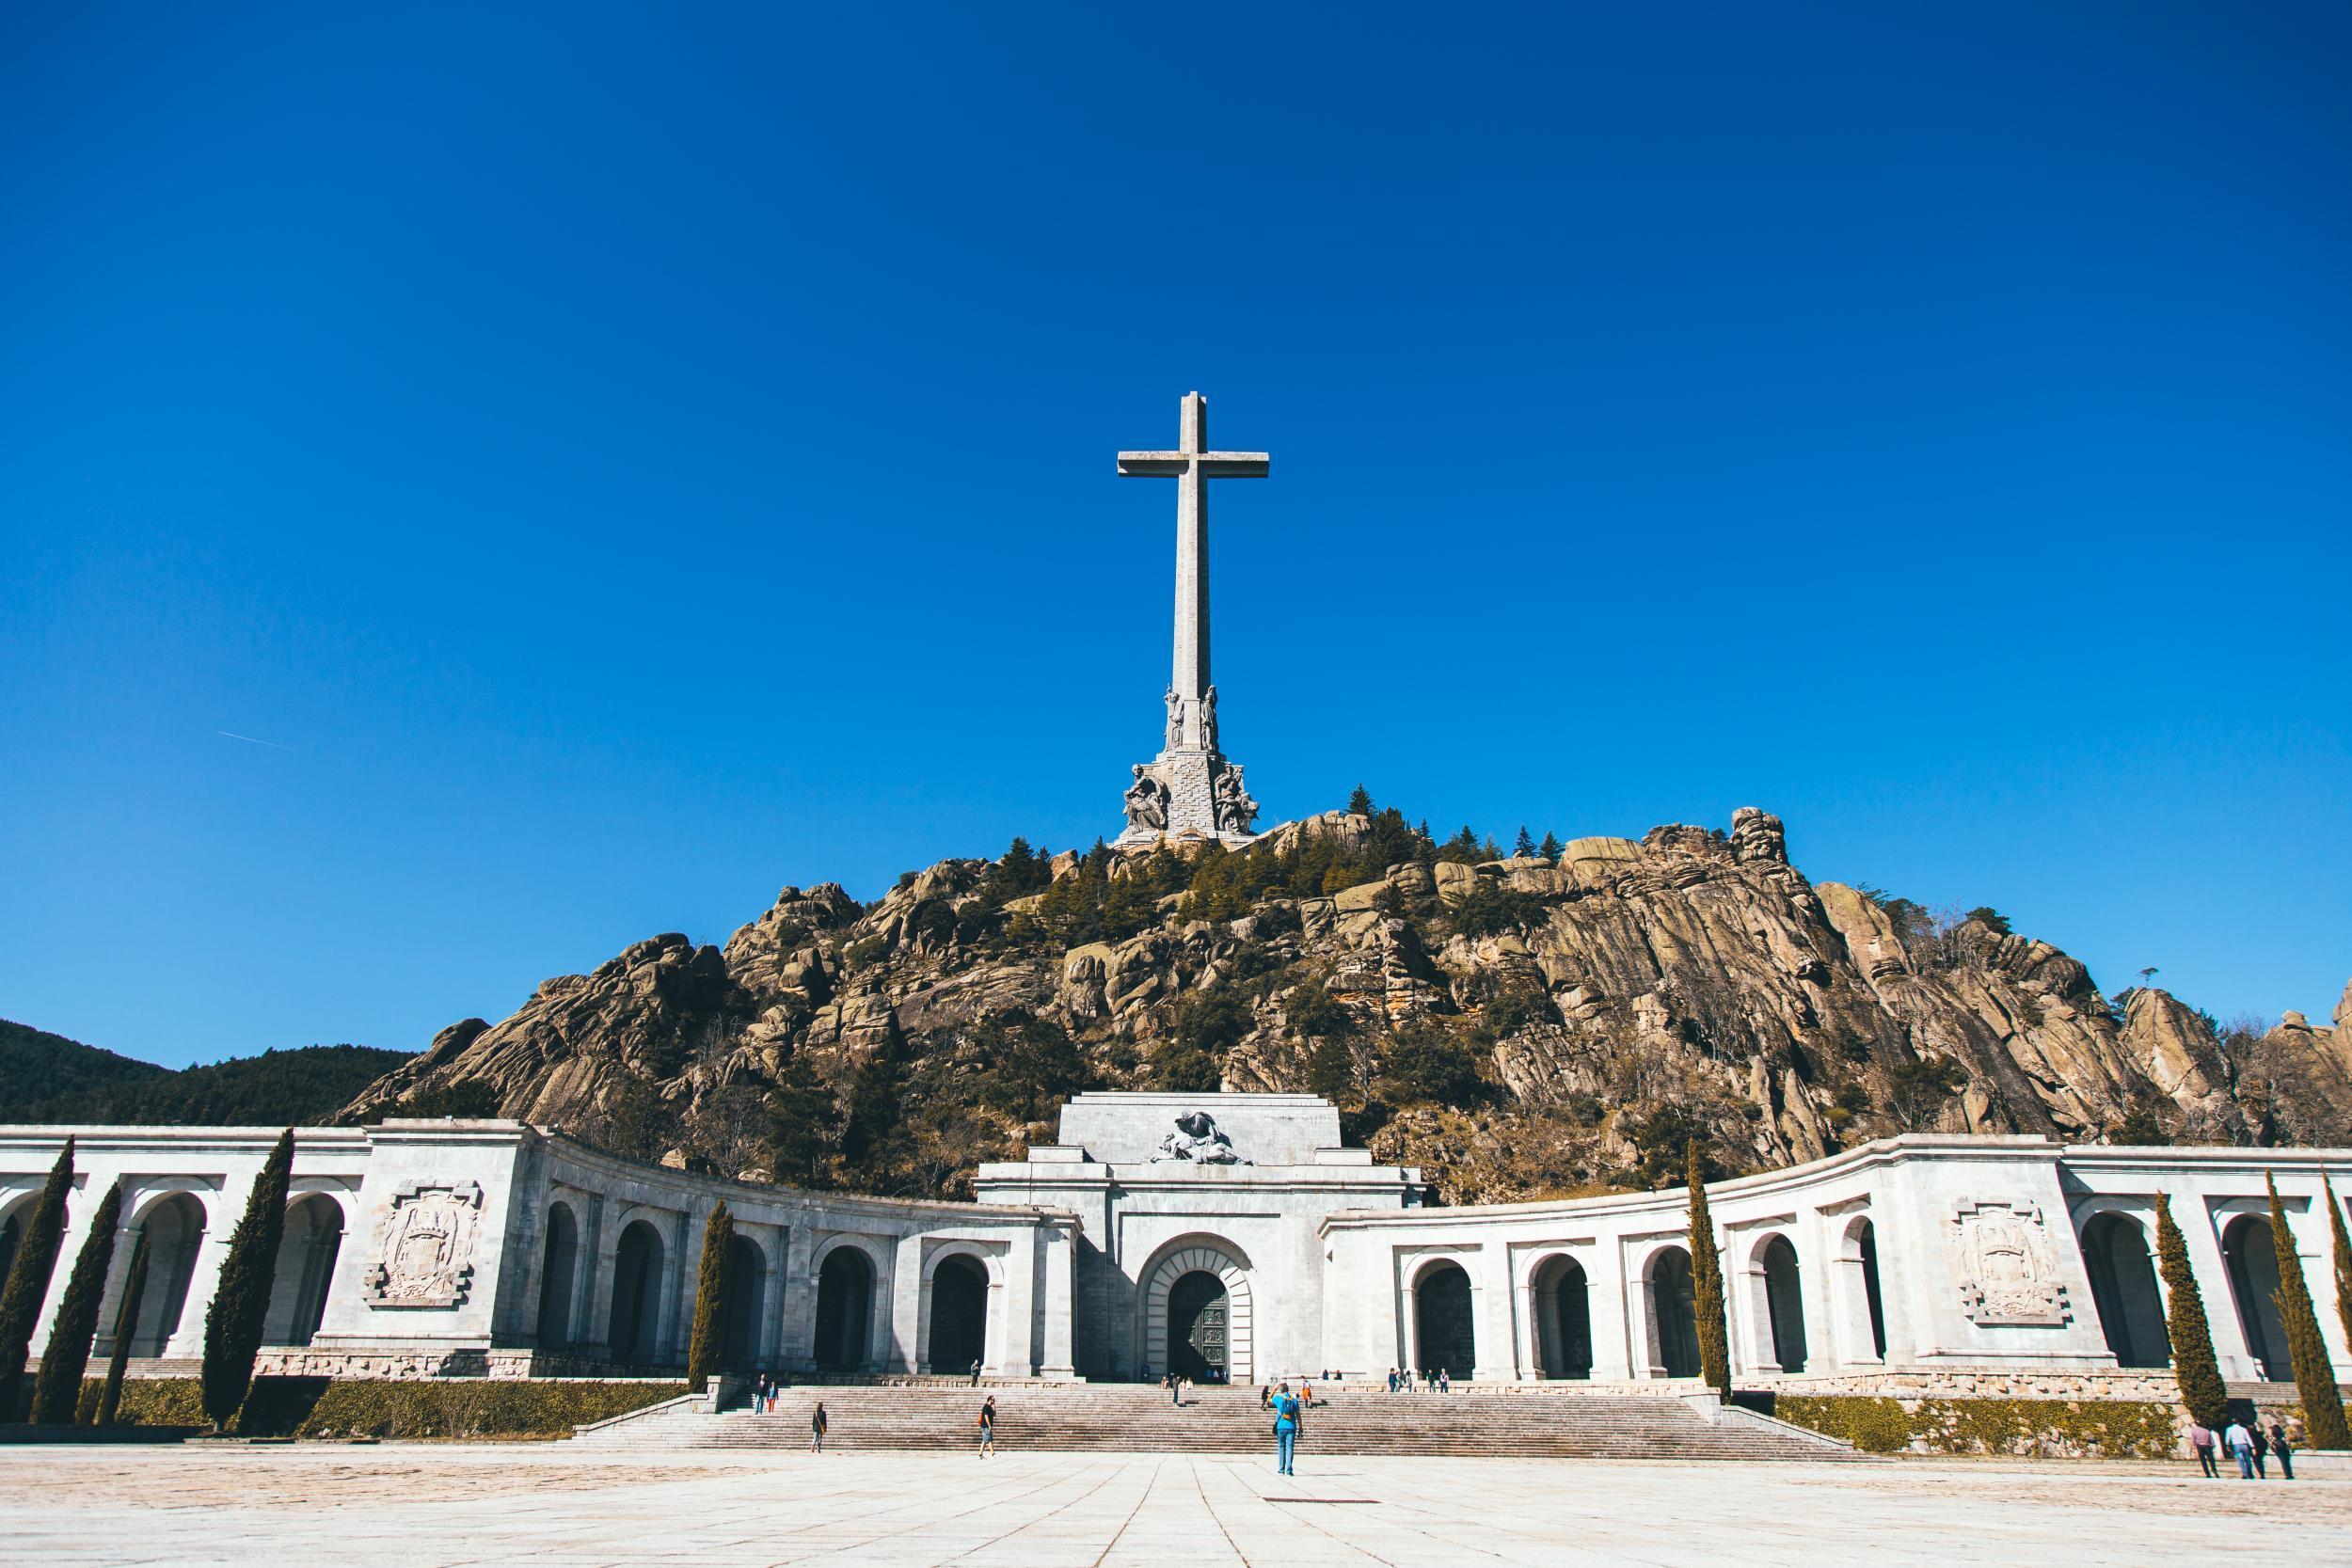 Franco's grave is one of the most divisive spots in Spain